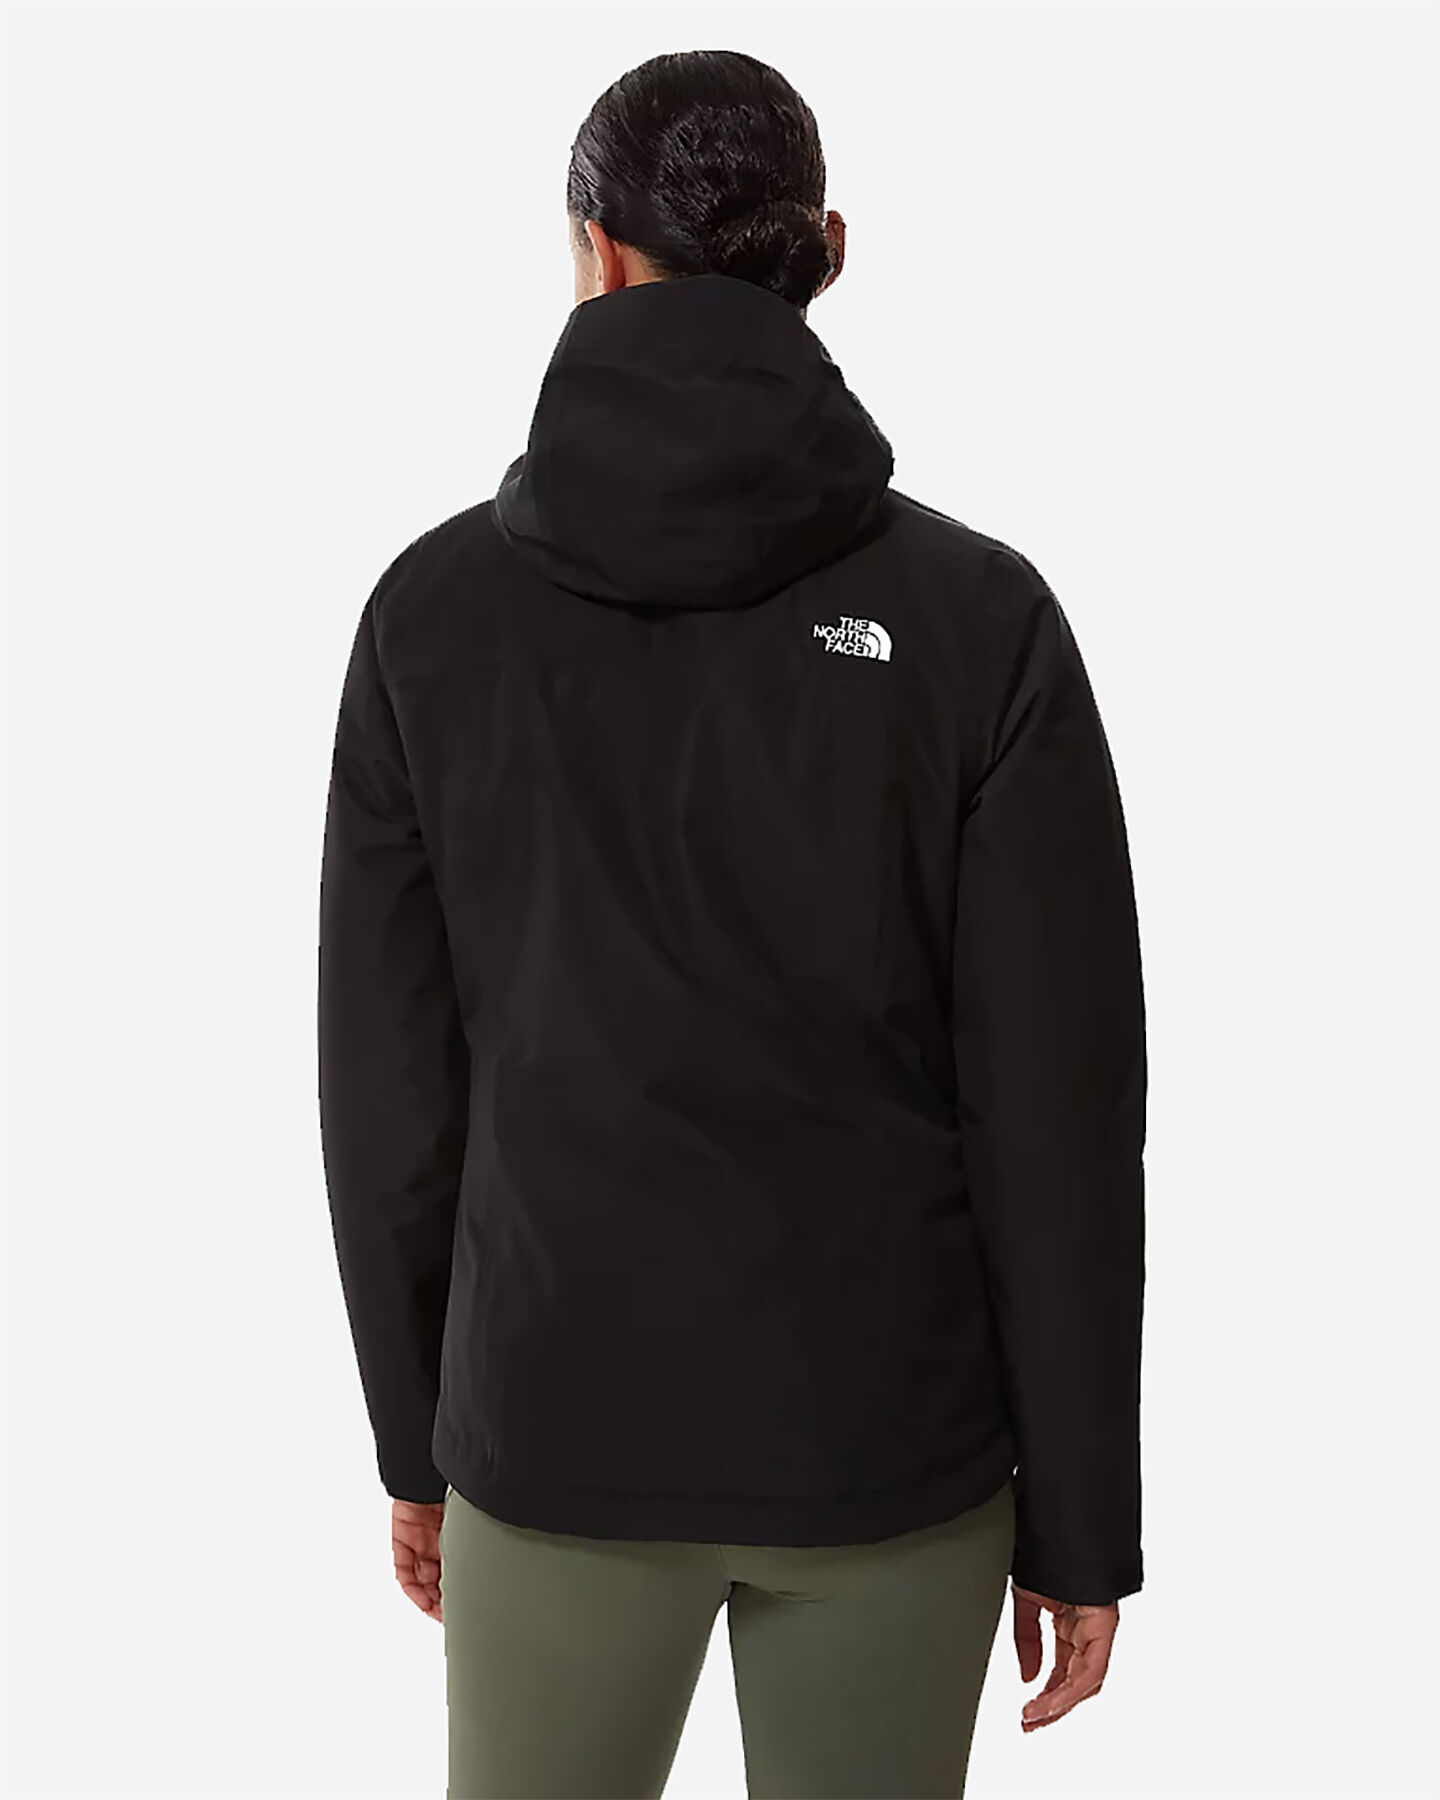  Giacca outdoor THE NORTH FACE DRYZZLE INSULATED W S5348745|JK3|XS scatto 4